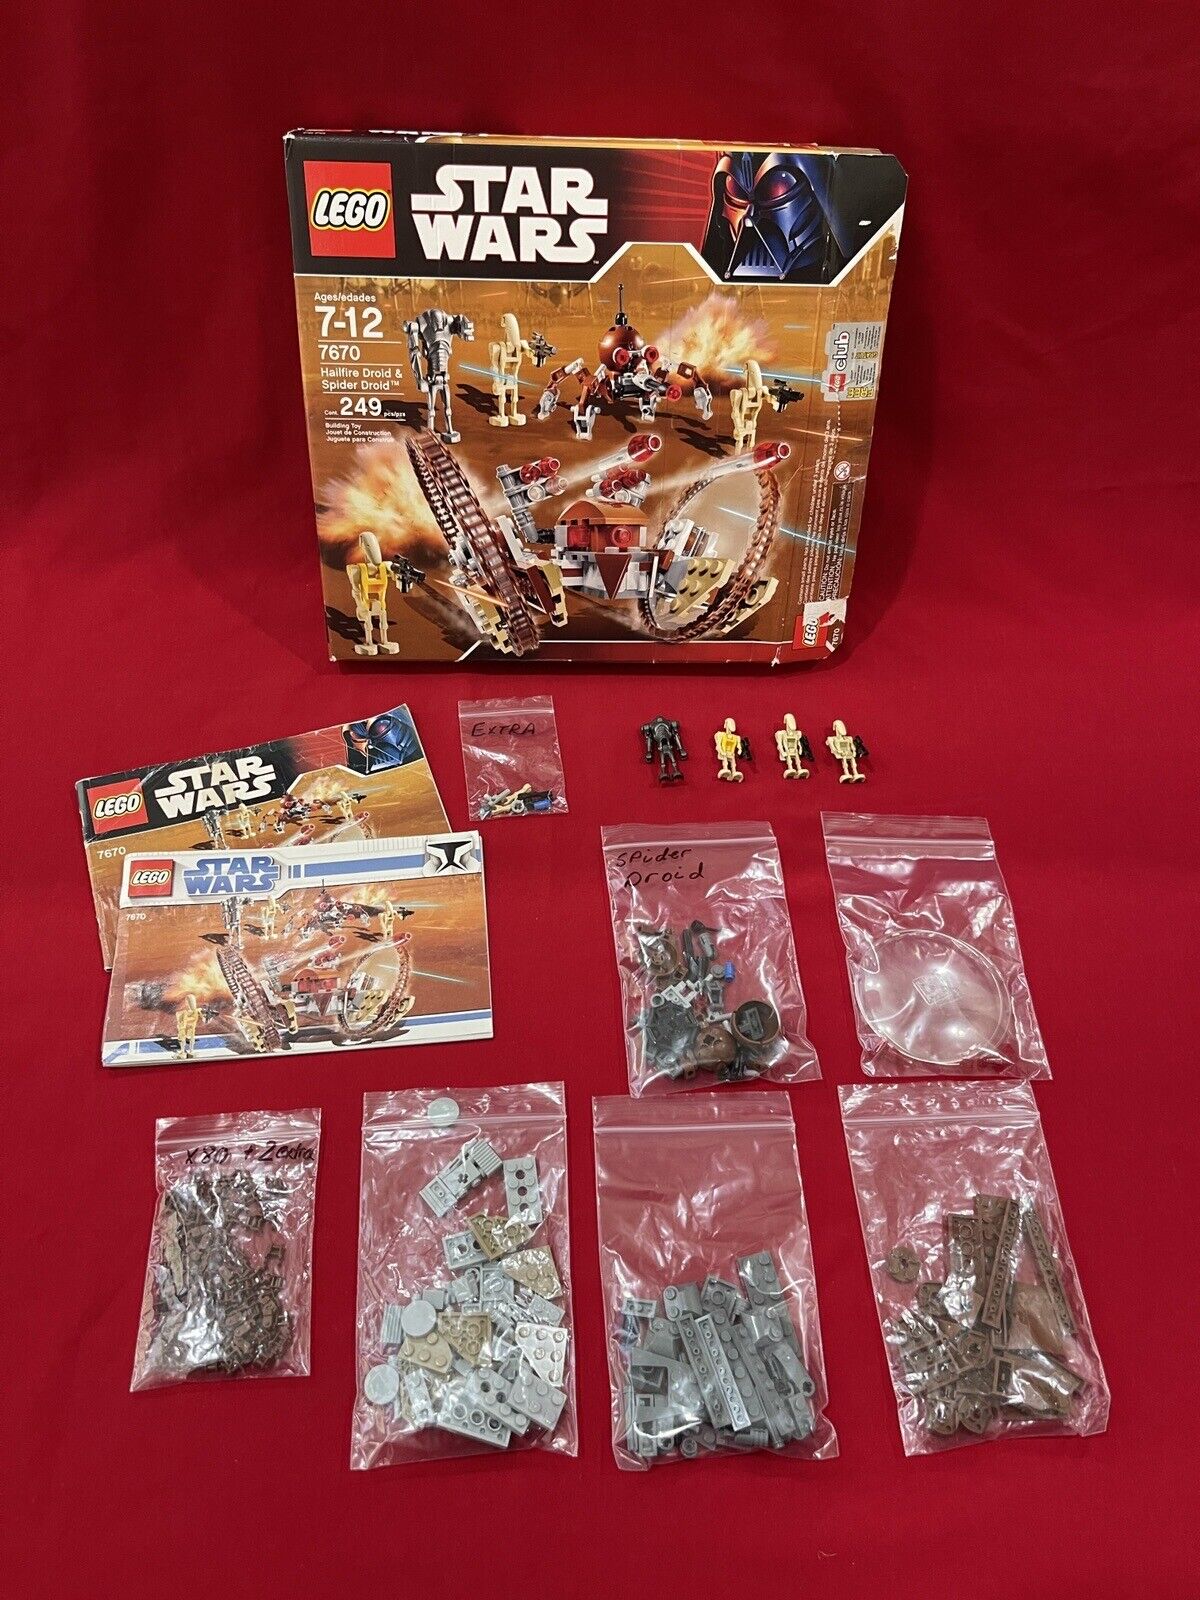 LEGO Star Wars 7670 Set: Hailfire Droid & Spider Droid, 100% COMPLETE with Box